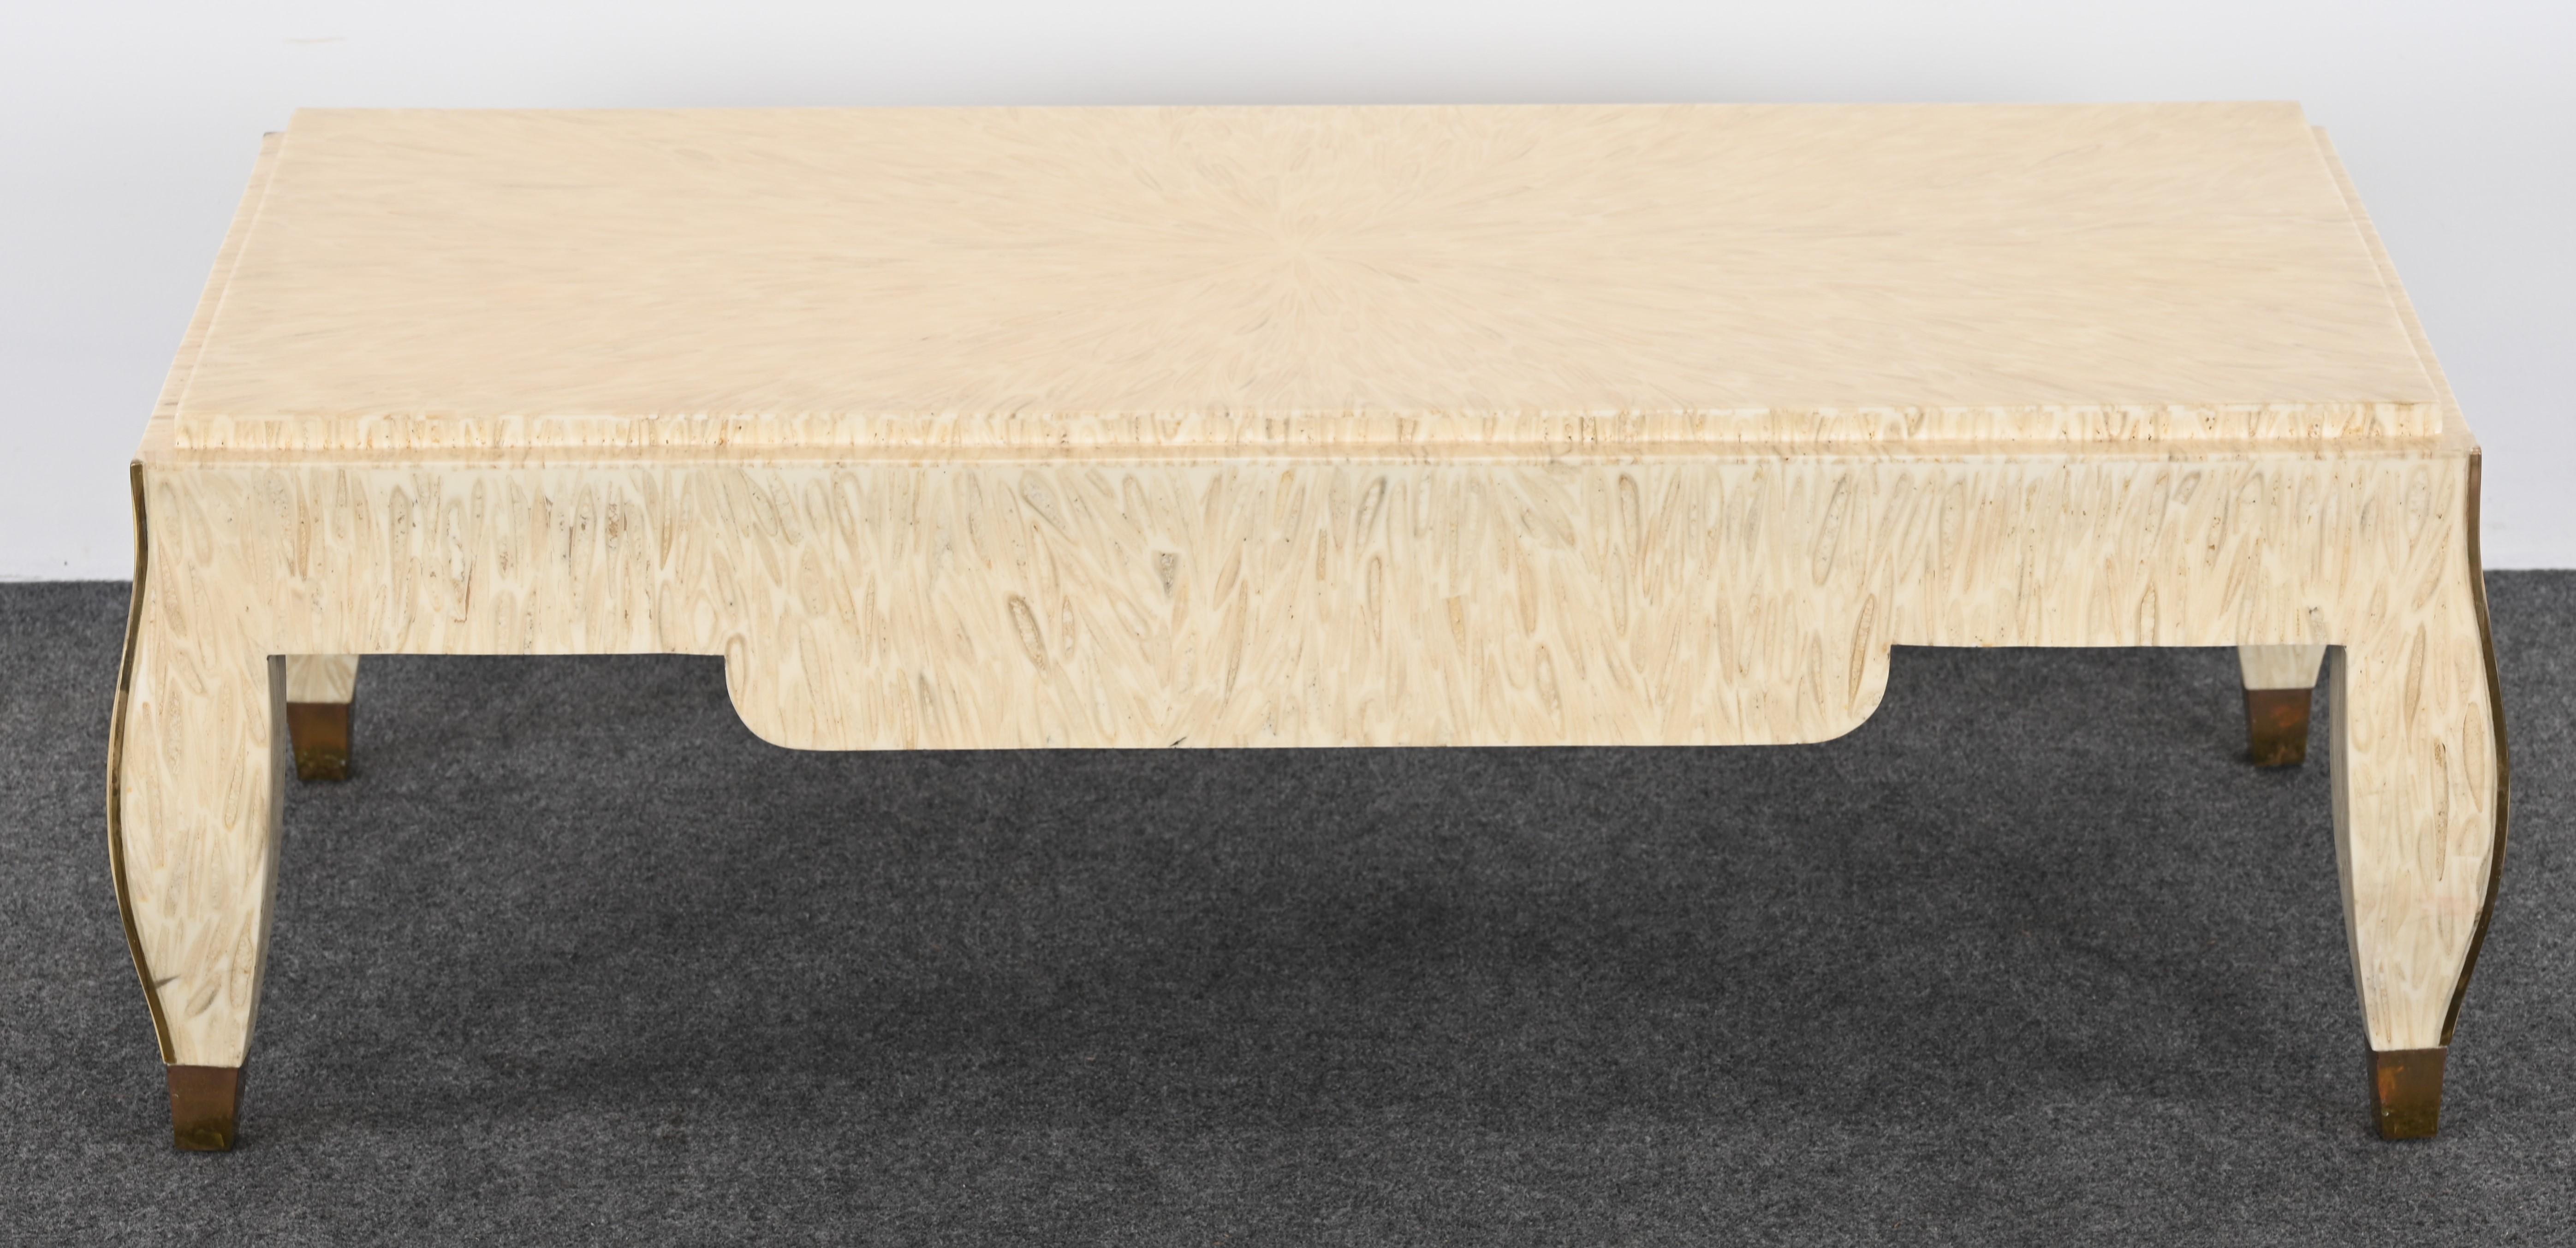 Organic Material and Brass Coffee Table by Enrique Garcel, 1980s For Sale 5